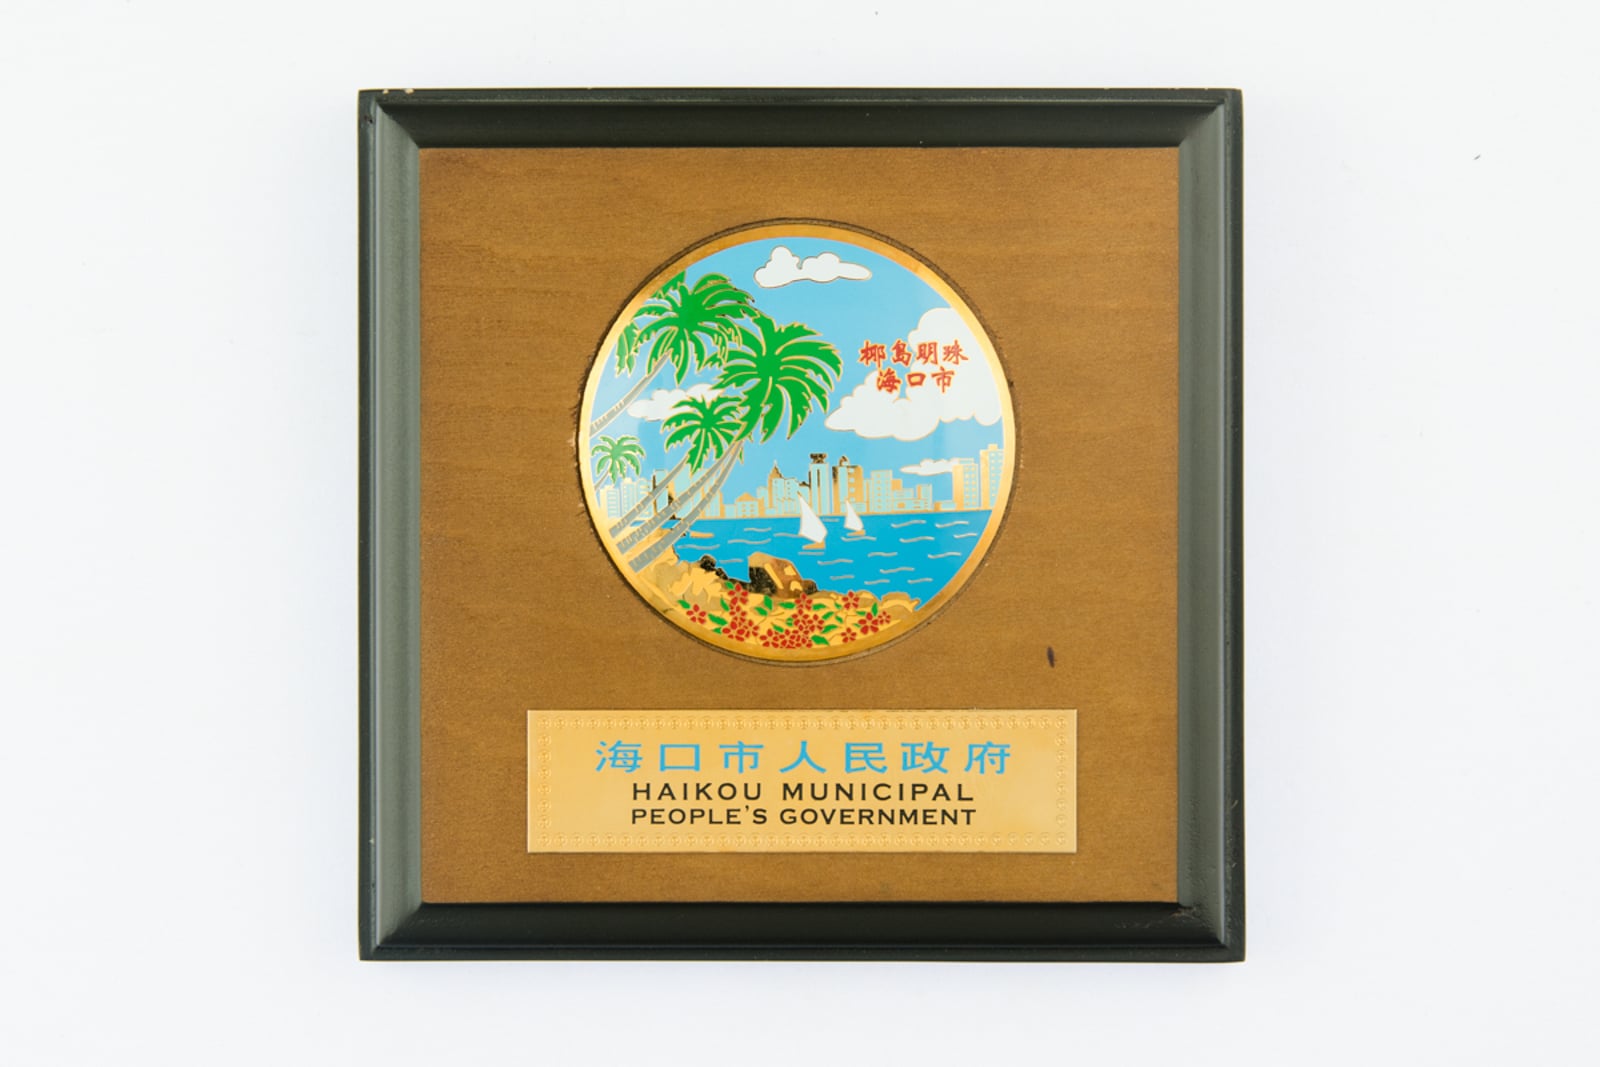 Haikou Municipal People's Government Plaque